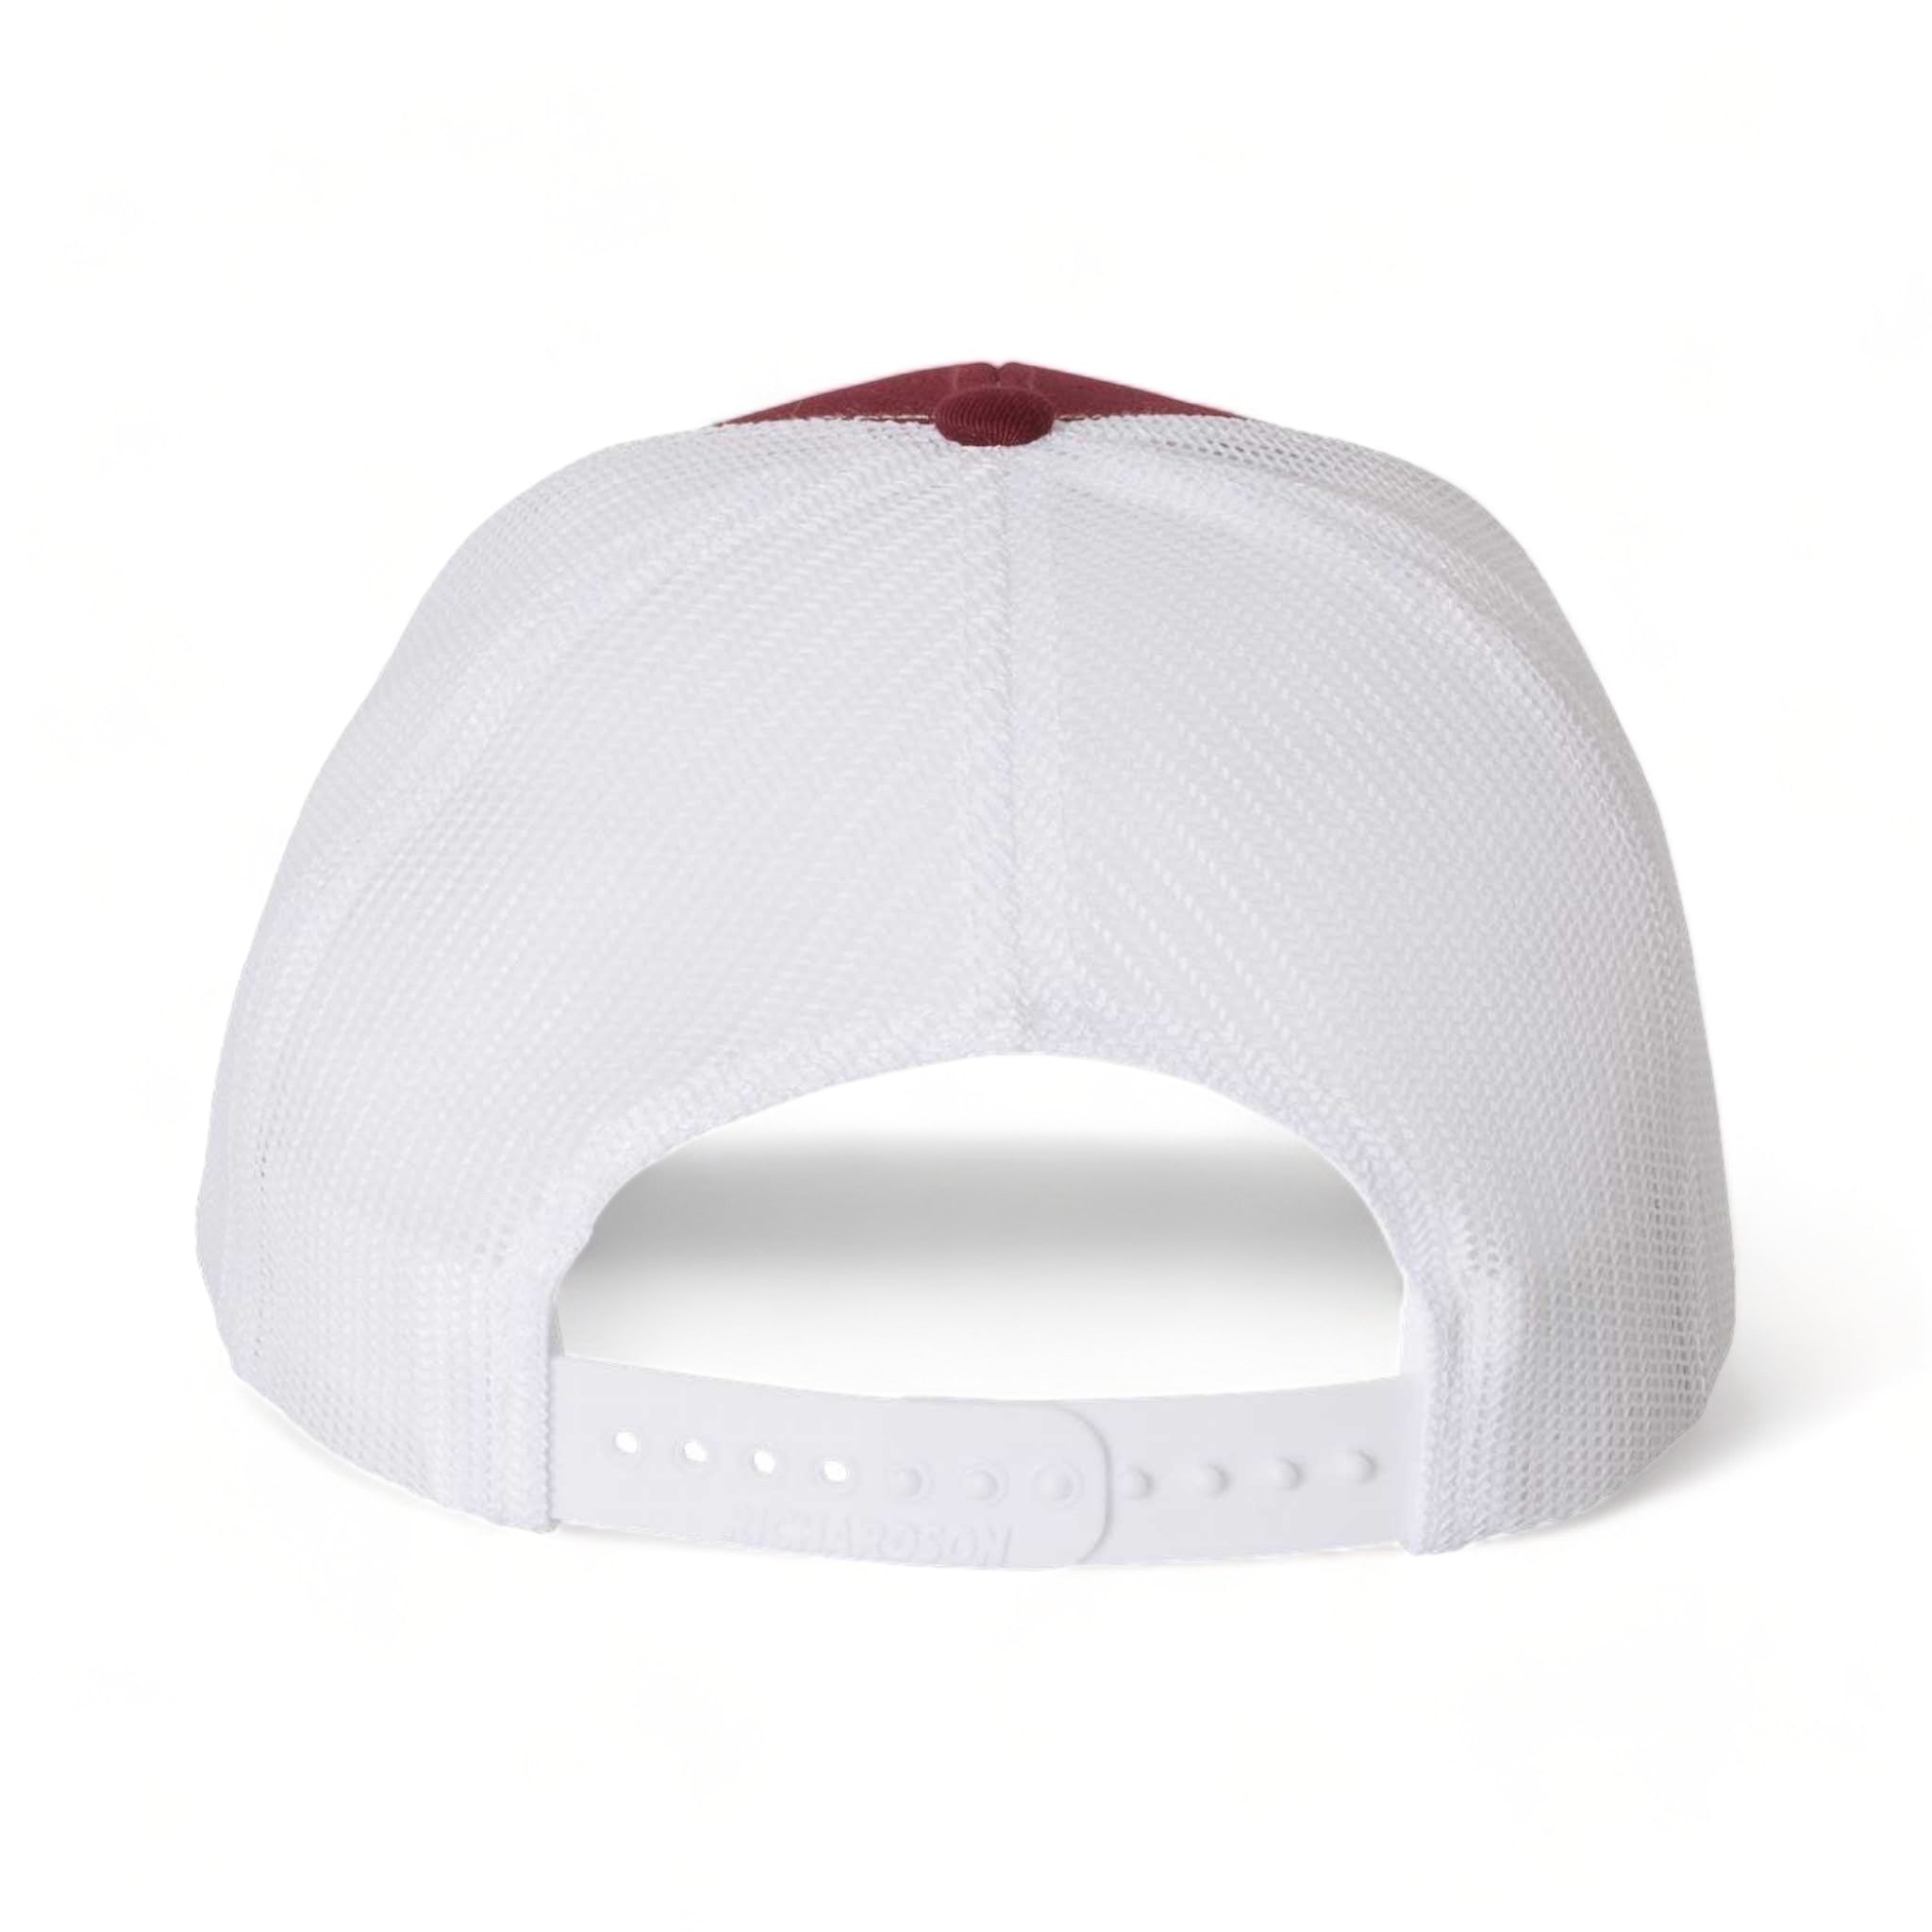 Back view of Richardson 112 custom hat in cardinal and white